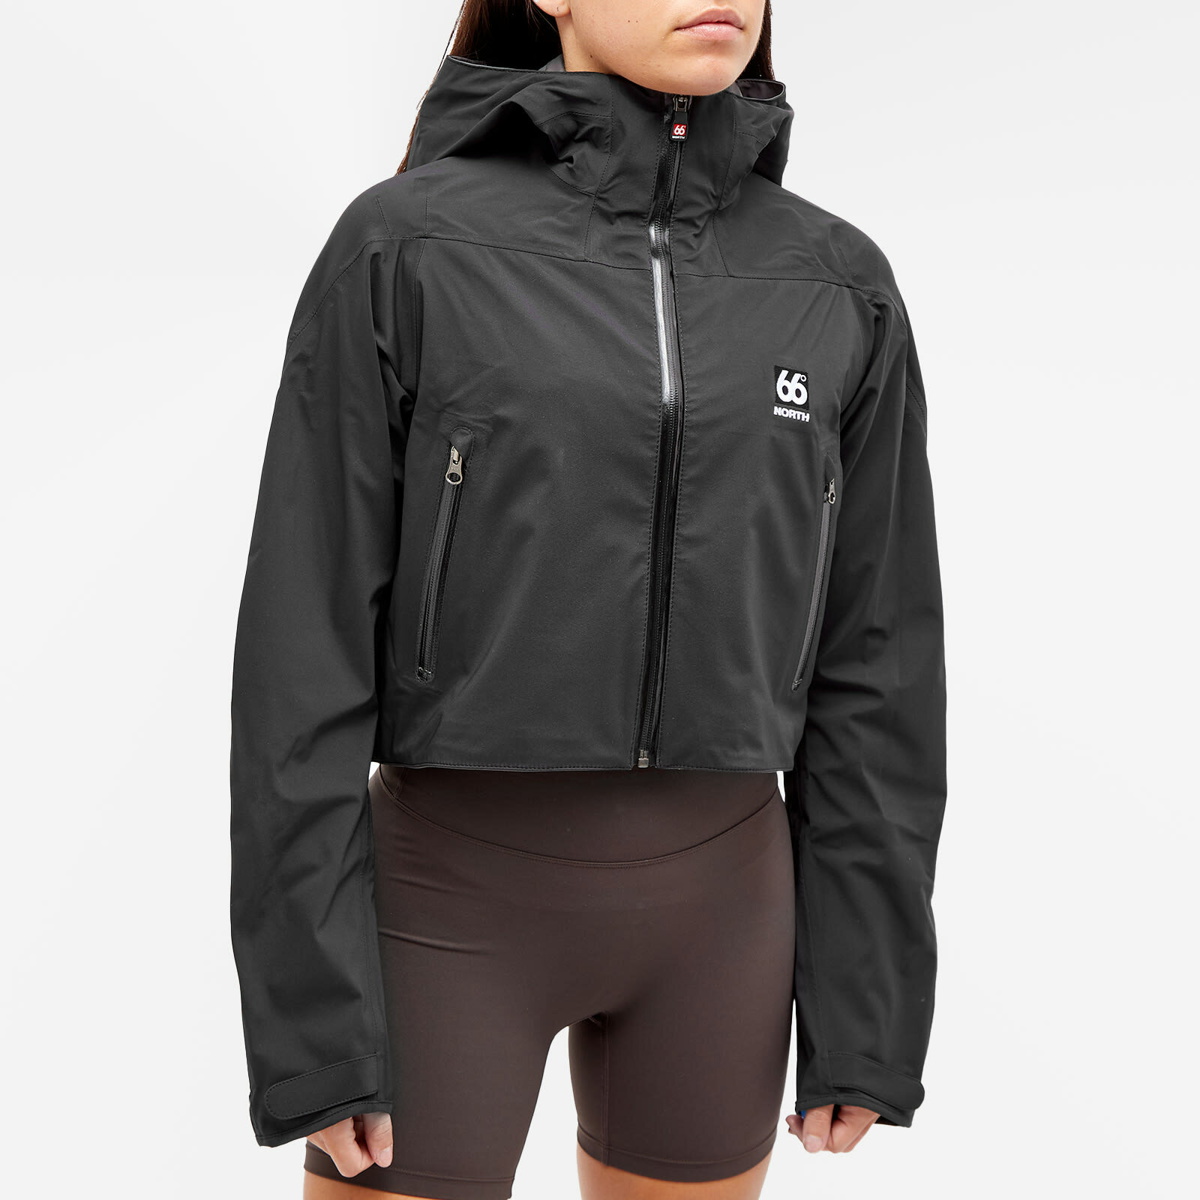 66° North Women's Snaefell W Cropped Neoshell Jacket in Black 66° North